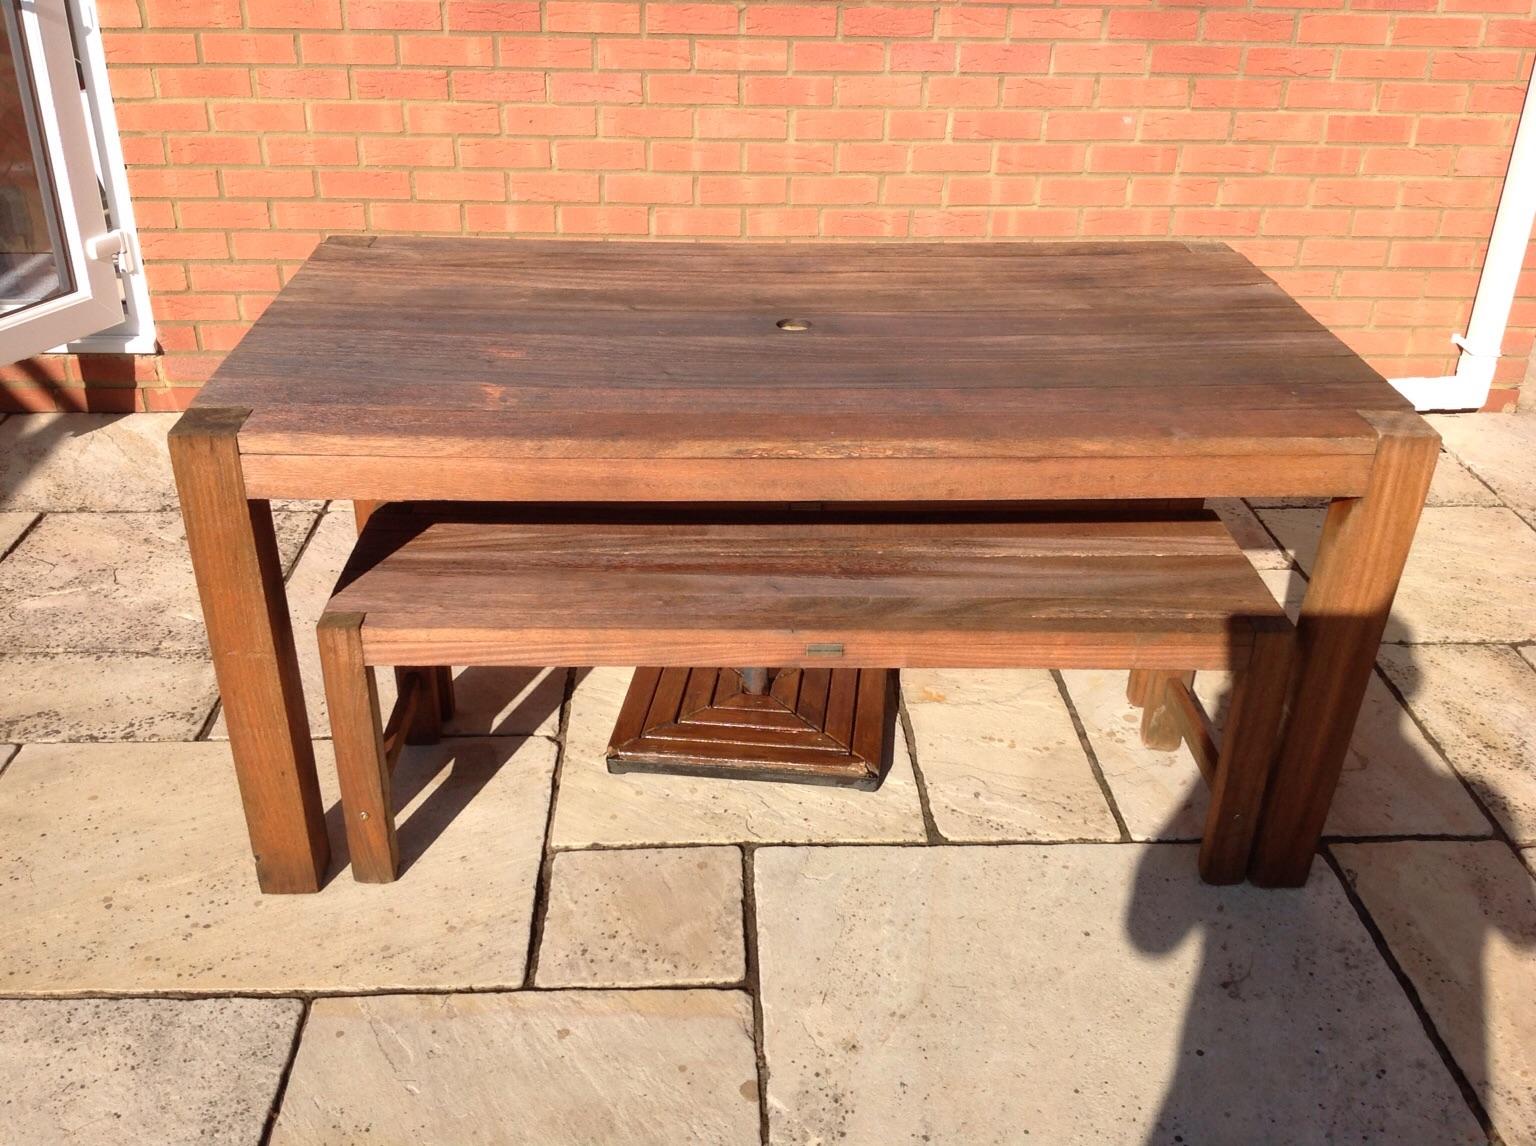 Panama Collection Garden Table And Benches In W7 Ealing Fur 100